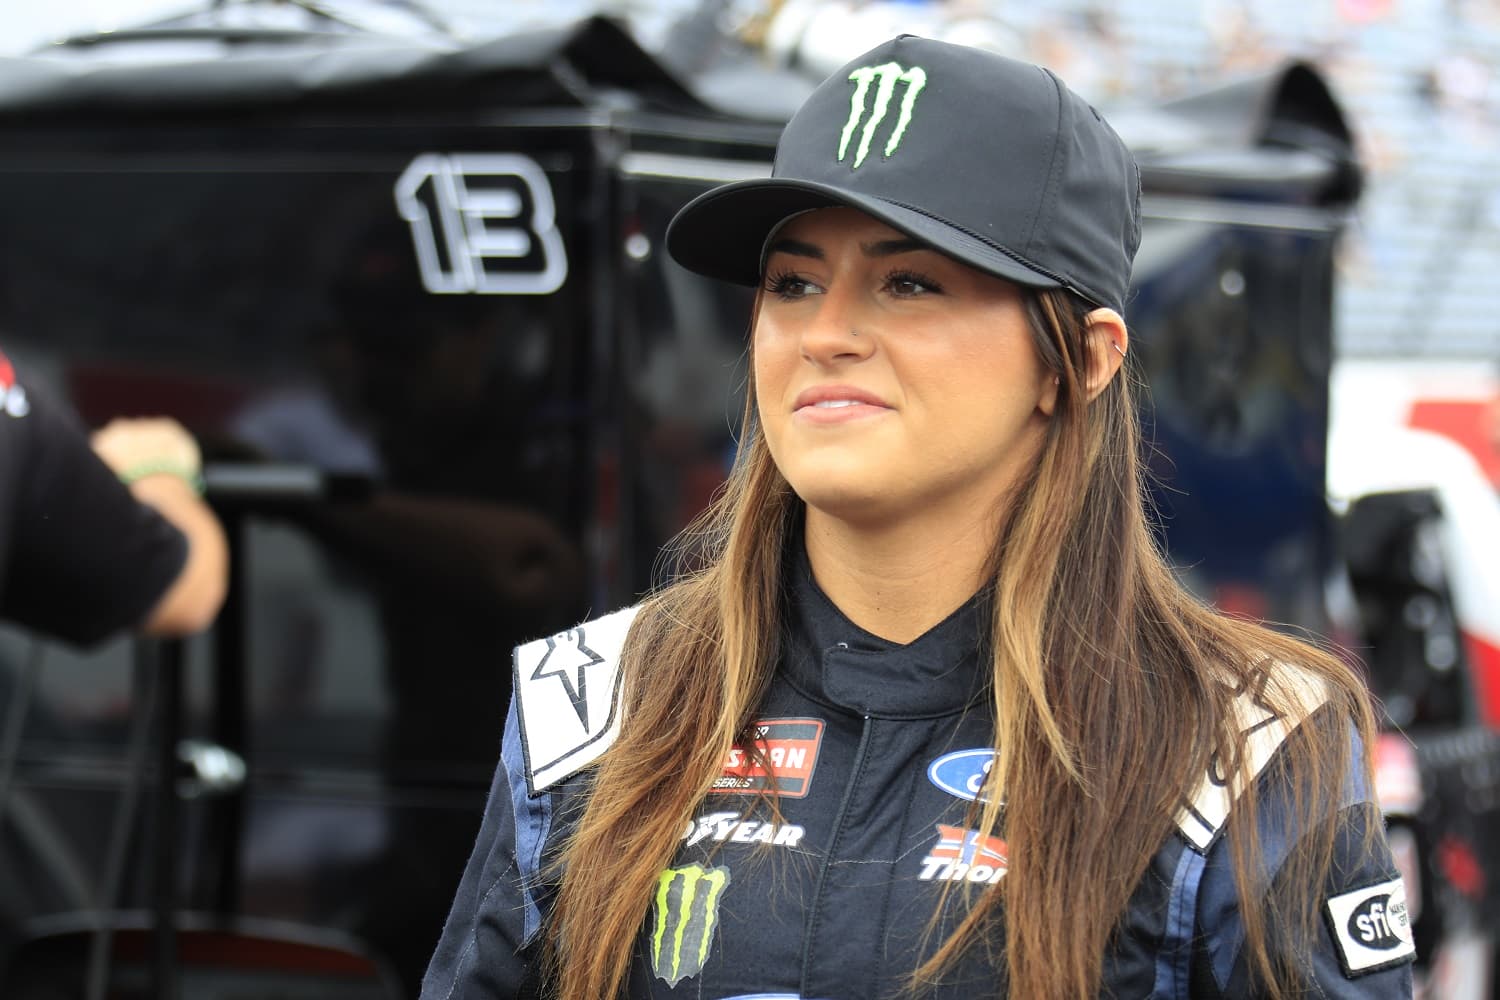 Hailie Deegan looks on prior to the NASCAR Craftsman Truck Series Tyson 250 on May 20, 2023 at North Wilkesboro Speedway.